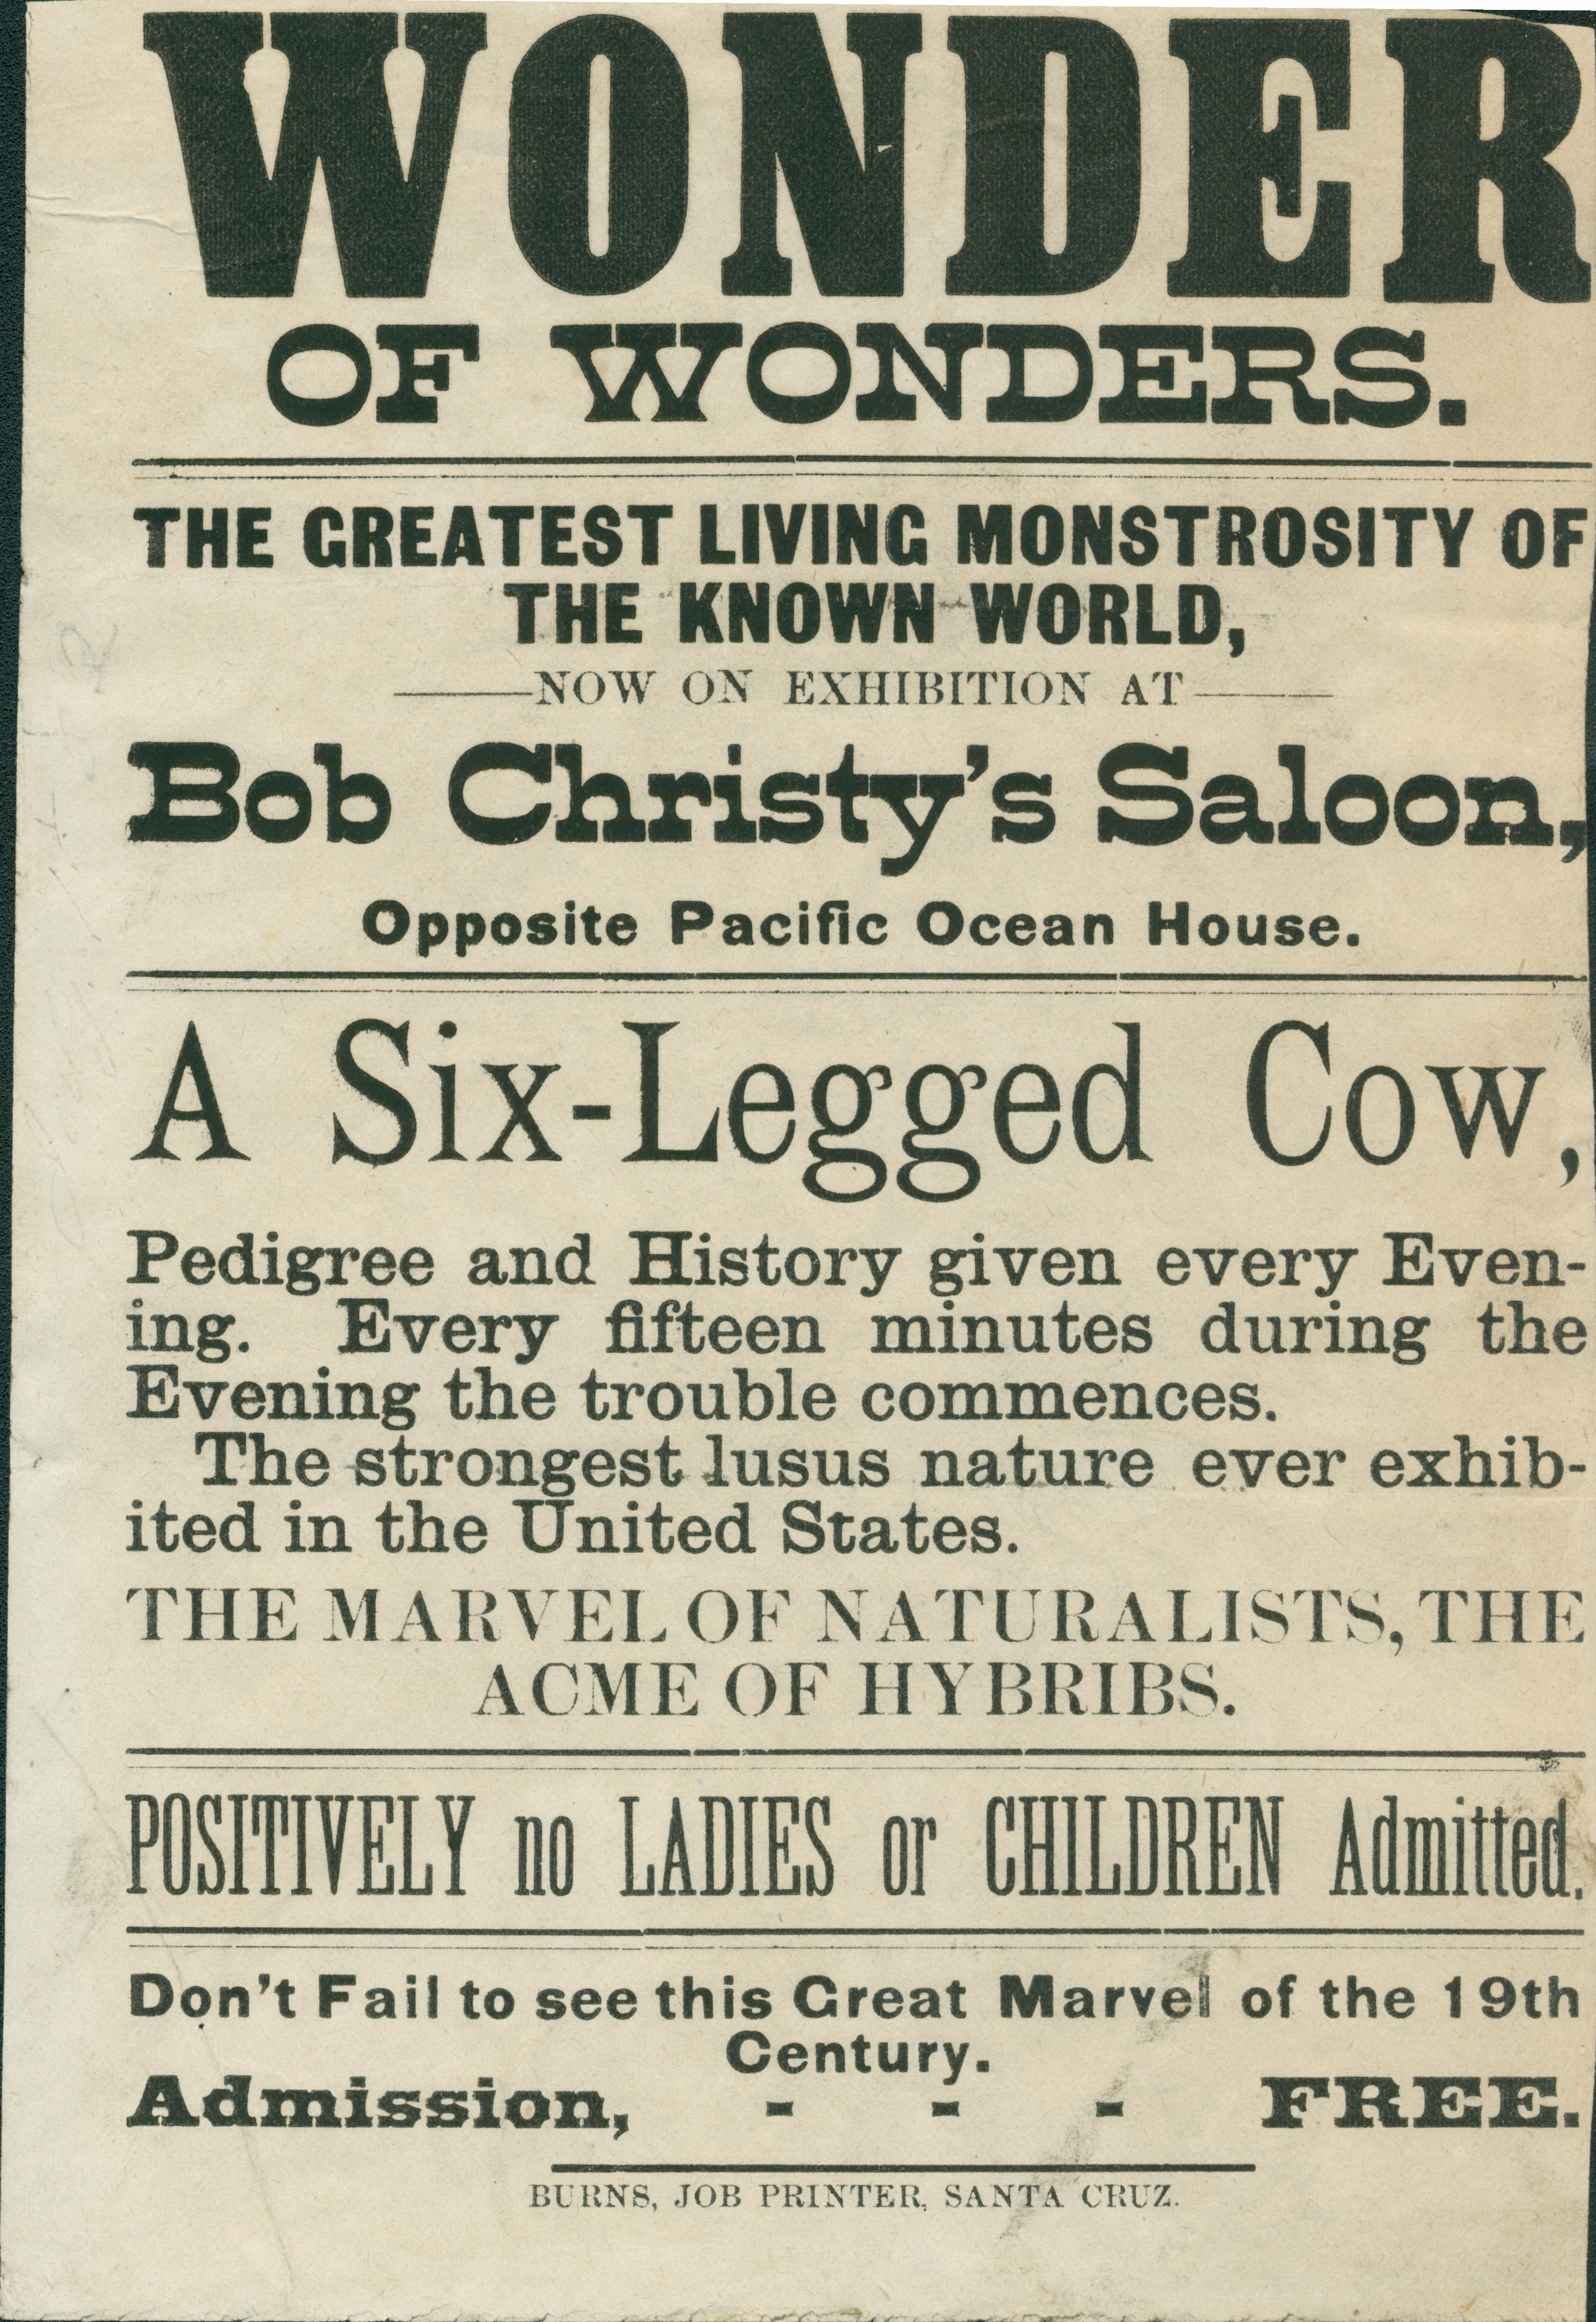 Shows information about the display of a six-legged cow